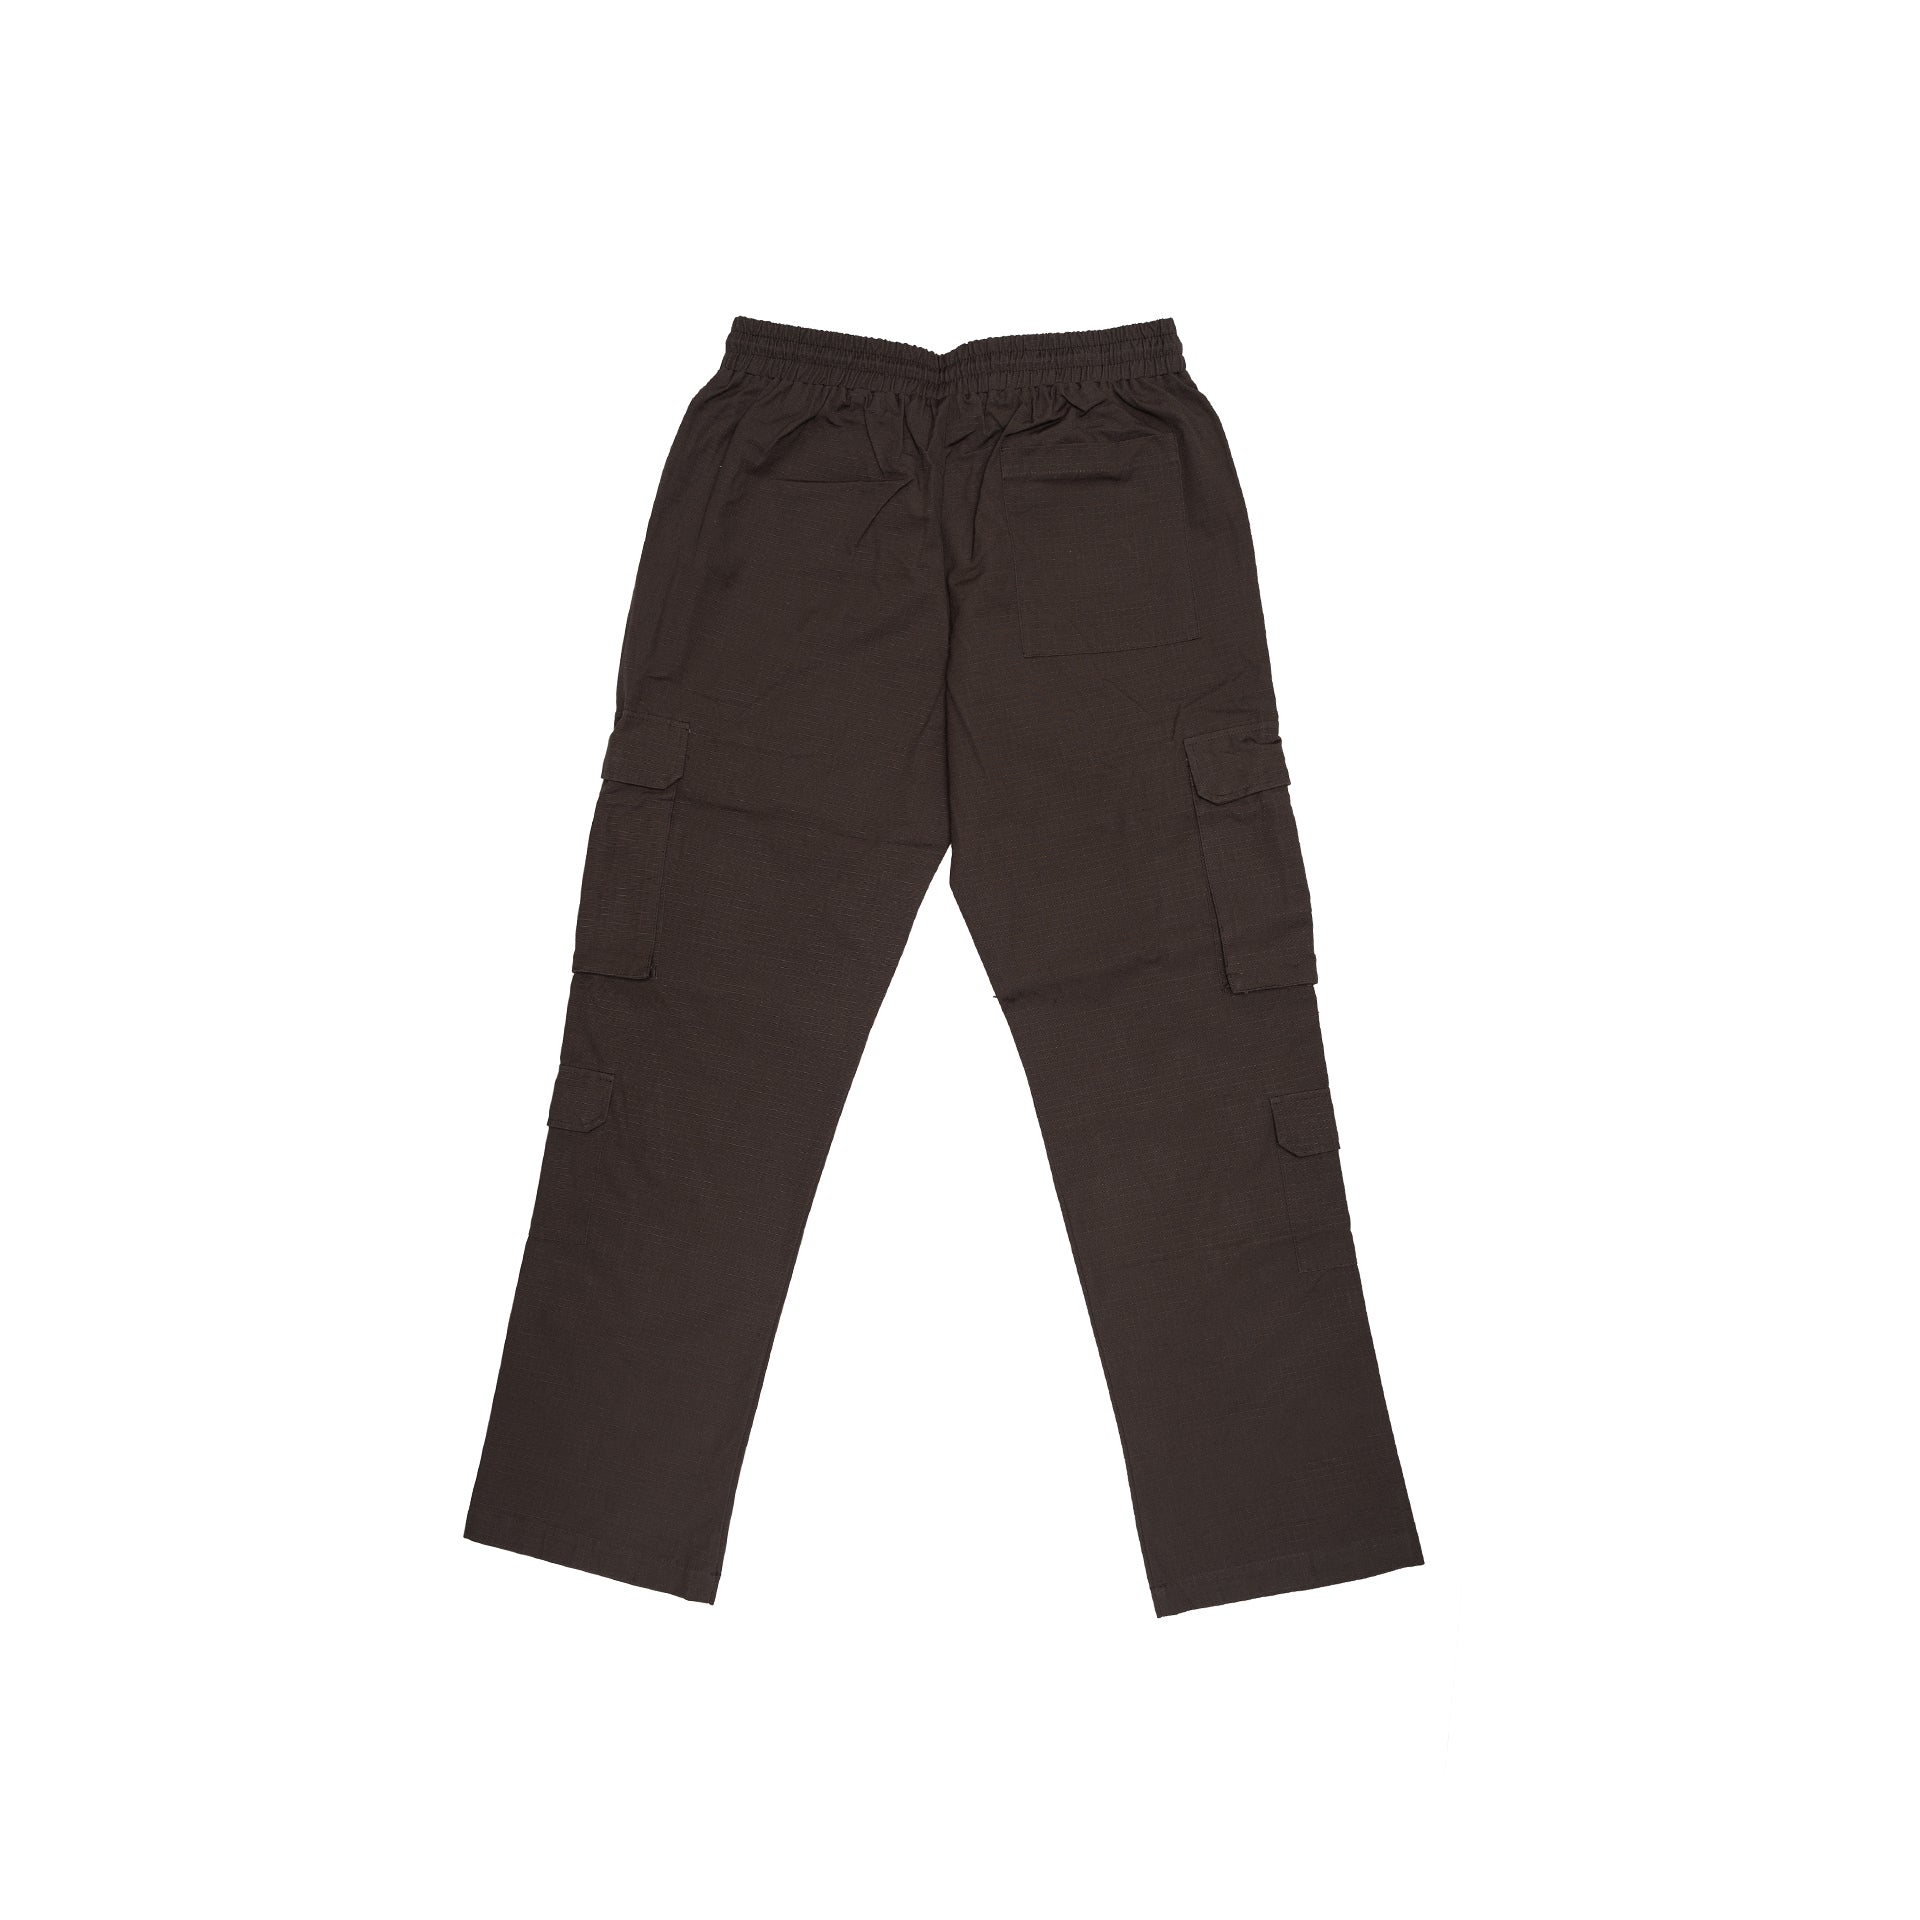 Gray Cargo Pants by Brandtionary